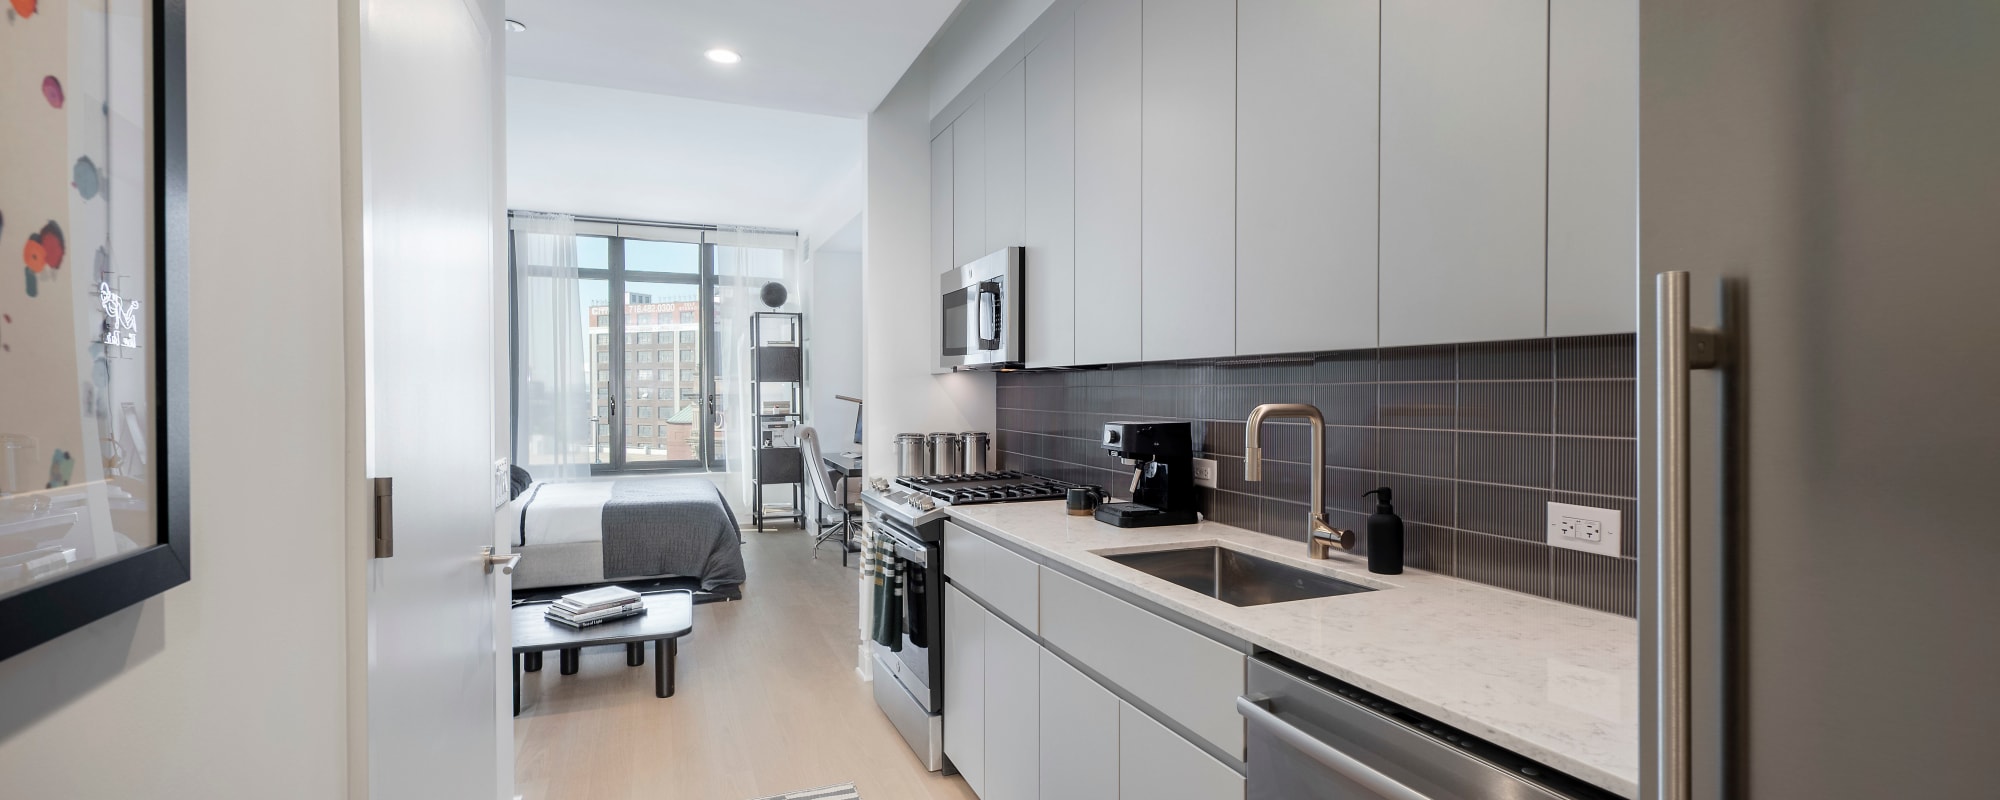 Rendering  beautiful kitchen on apartment model at 8 Court Square in Long Island City, New York